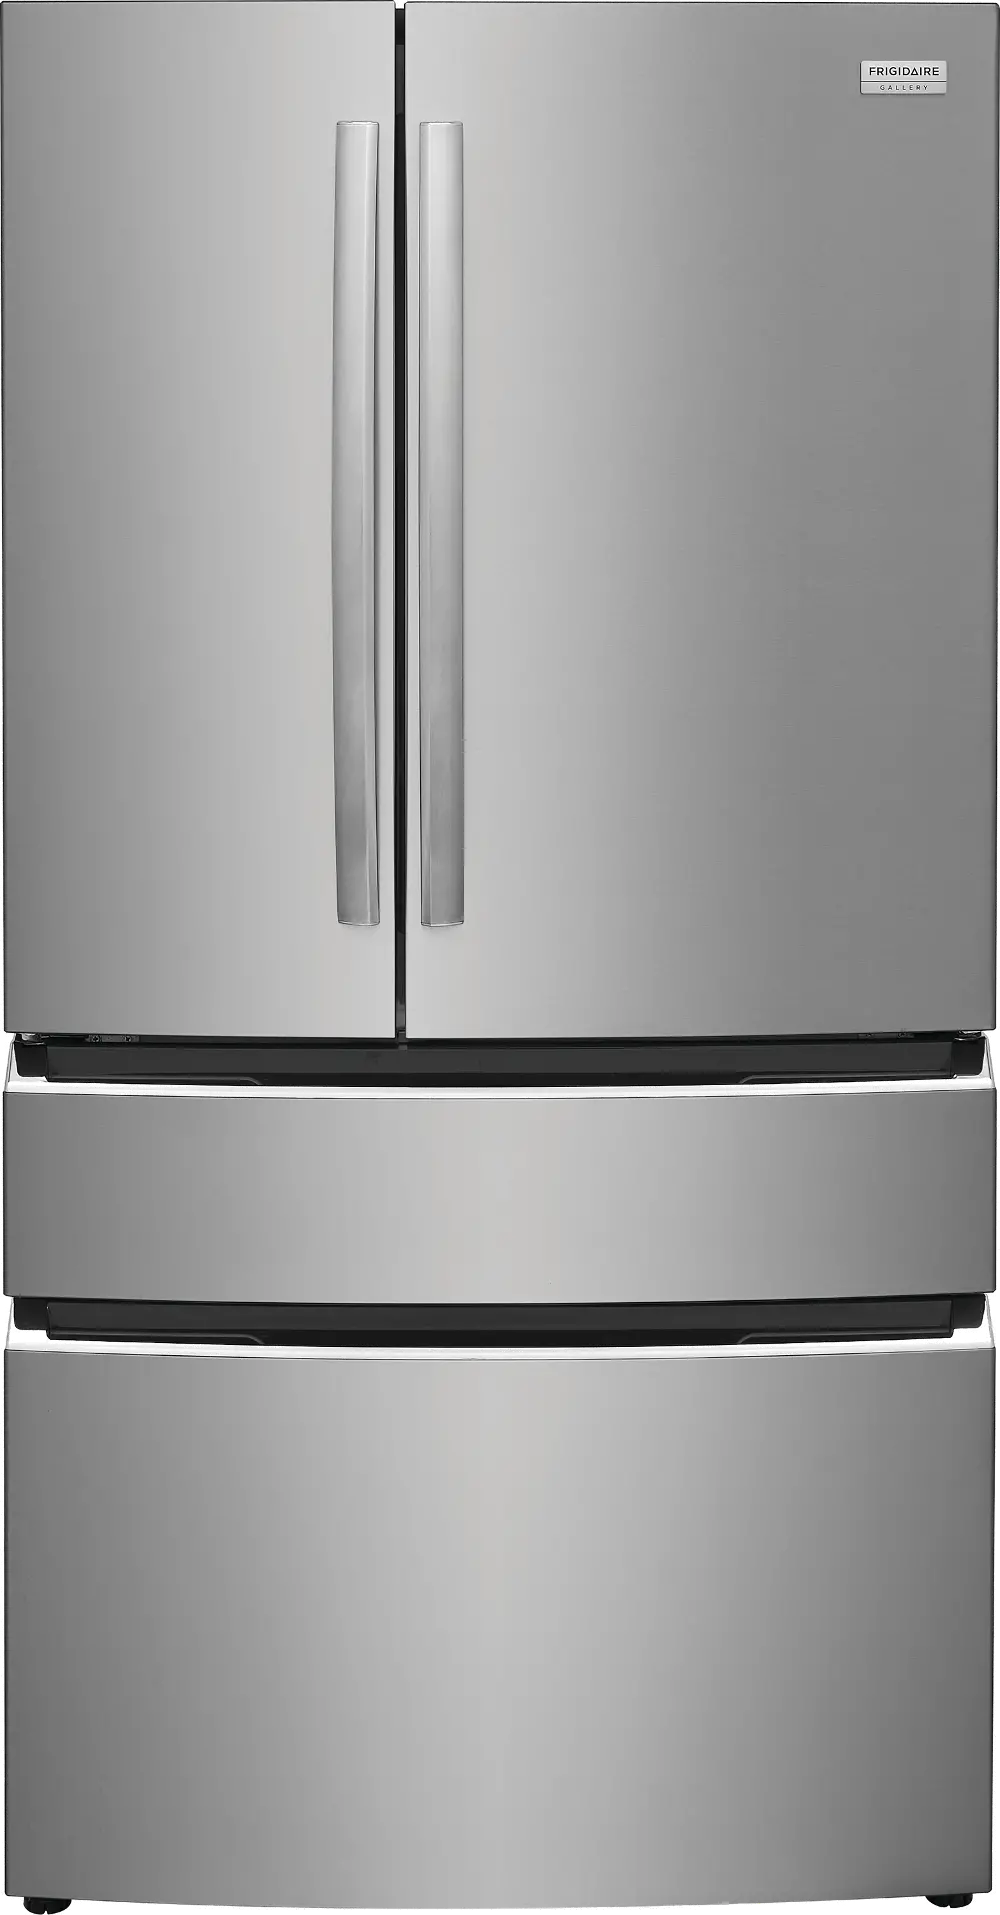 Frigidaire Gallery 27.2 Cu Ft French Door Refrigerator - Stainless ...